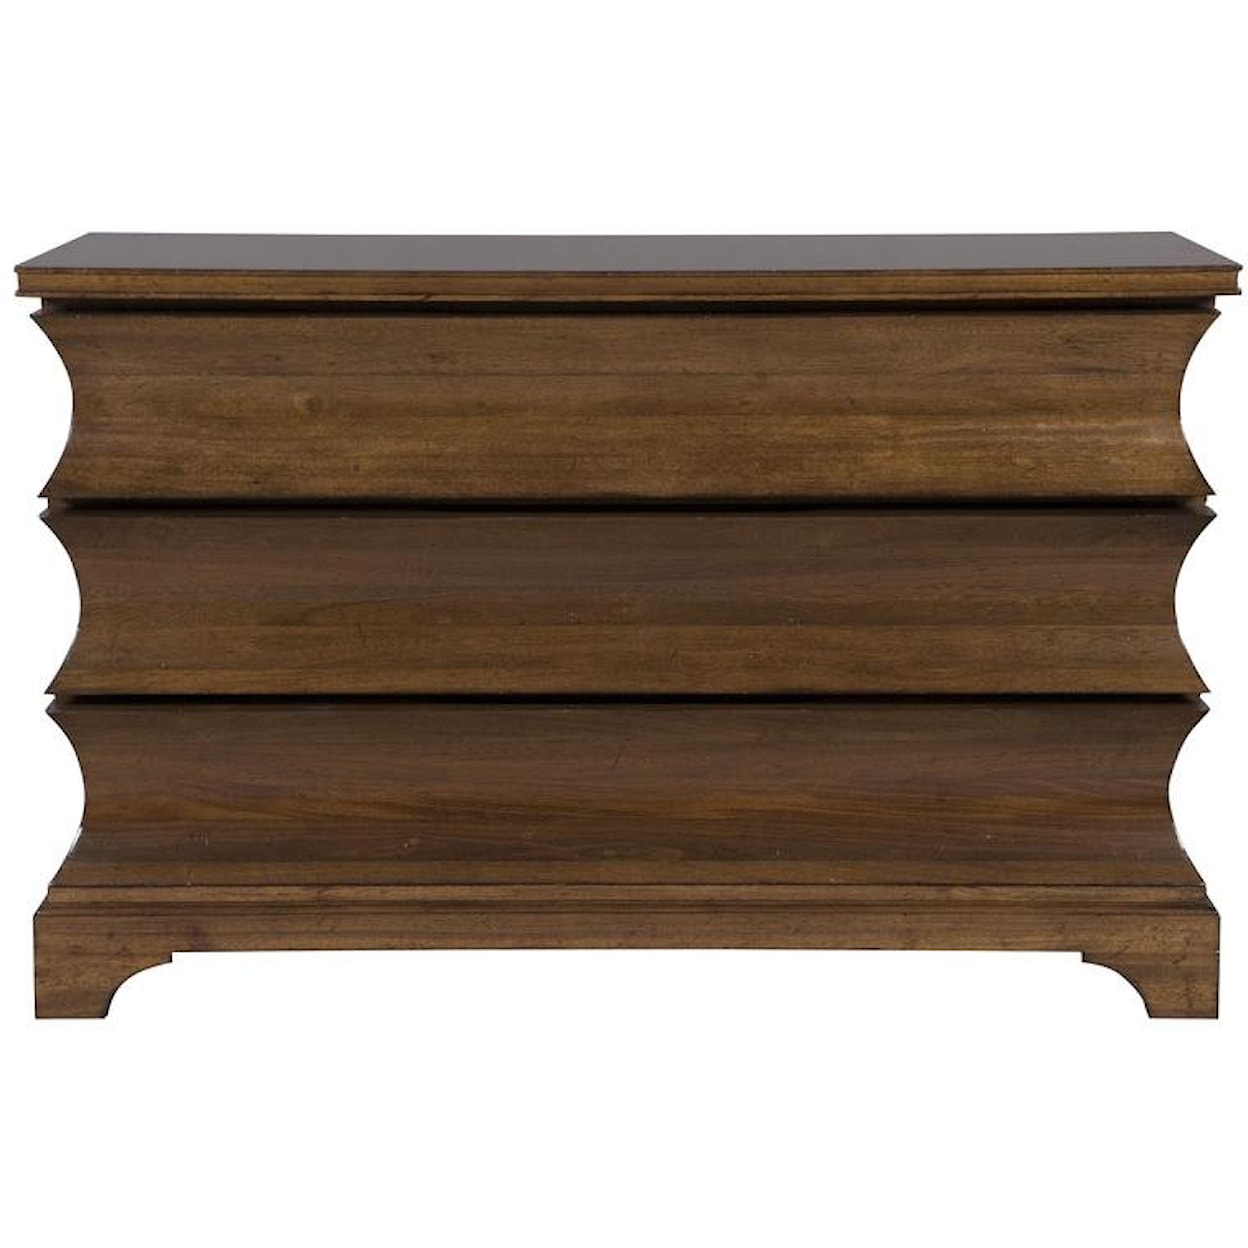 Vanguard Furniture Thom Filicia Home Collection Accent Chest